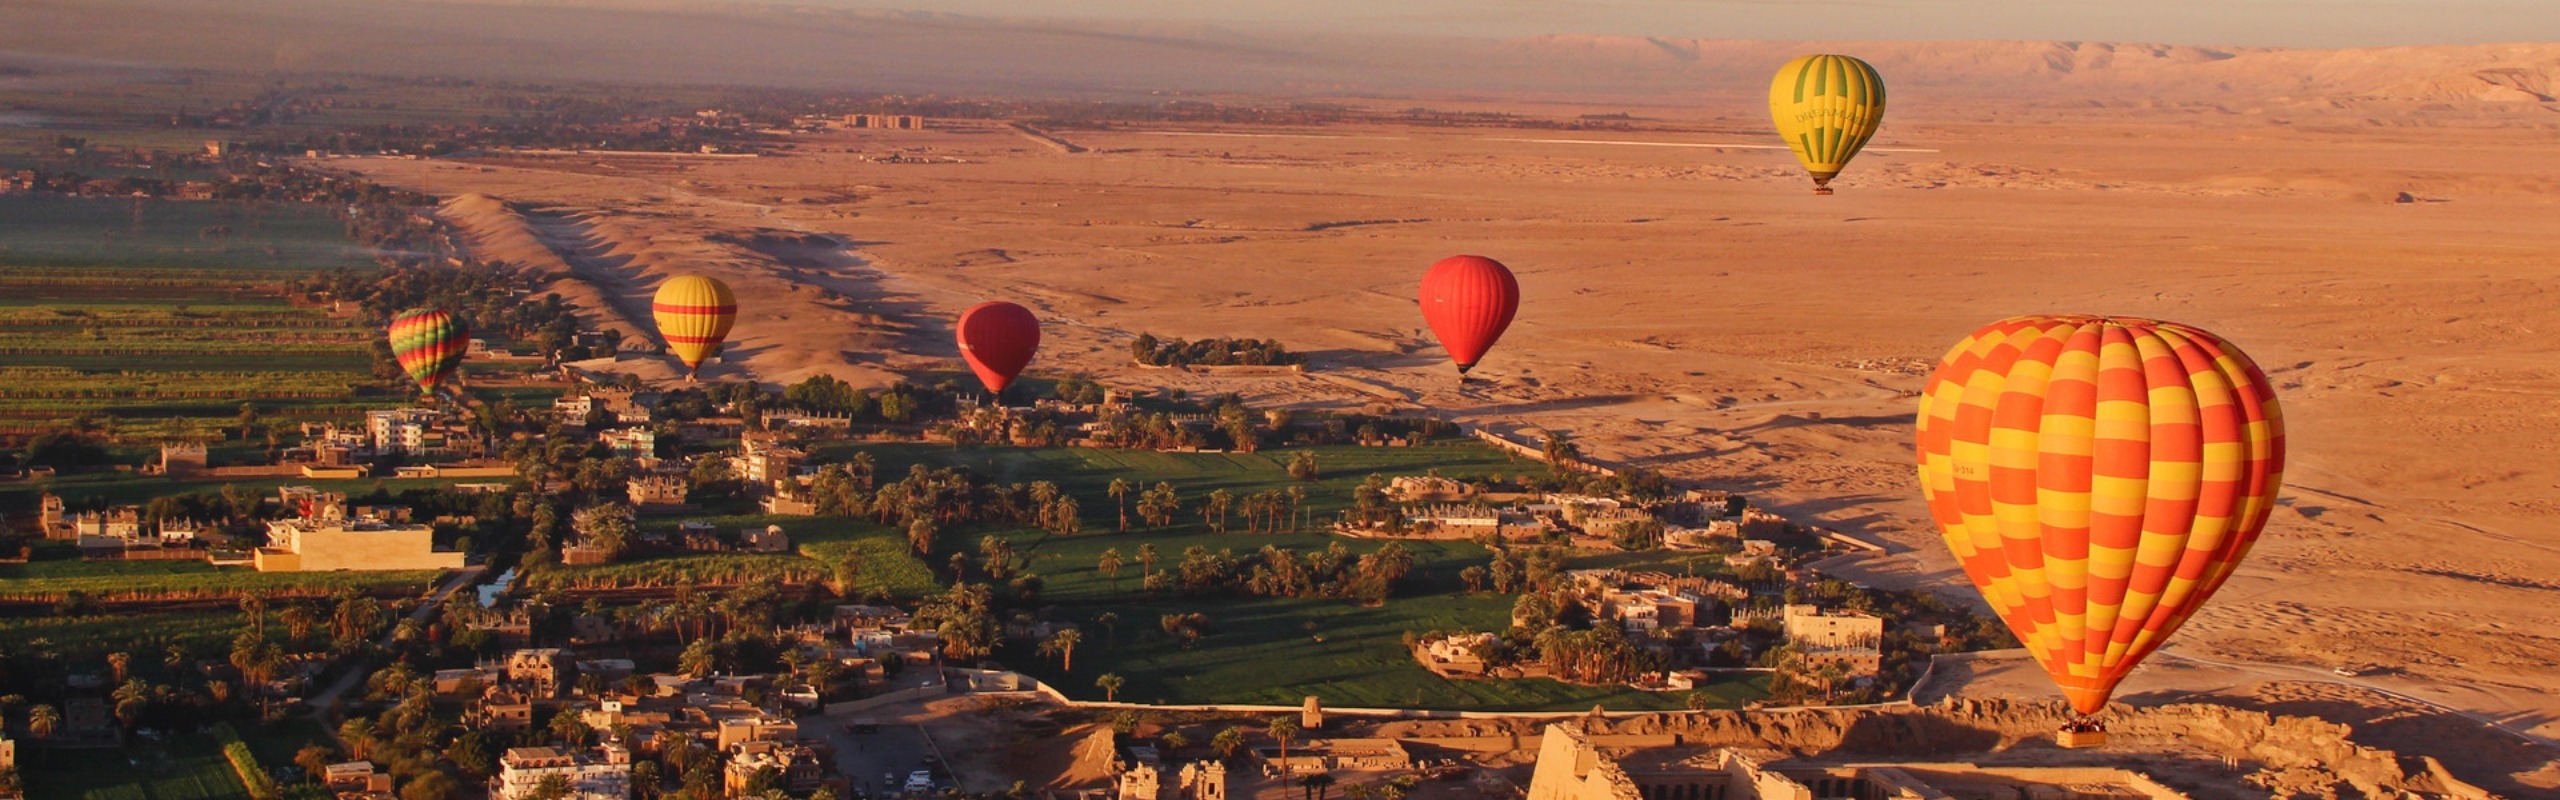 Tips for Taking the Hot Air Balloons in Luxor